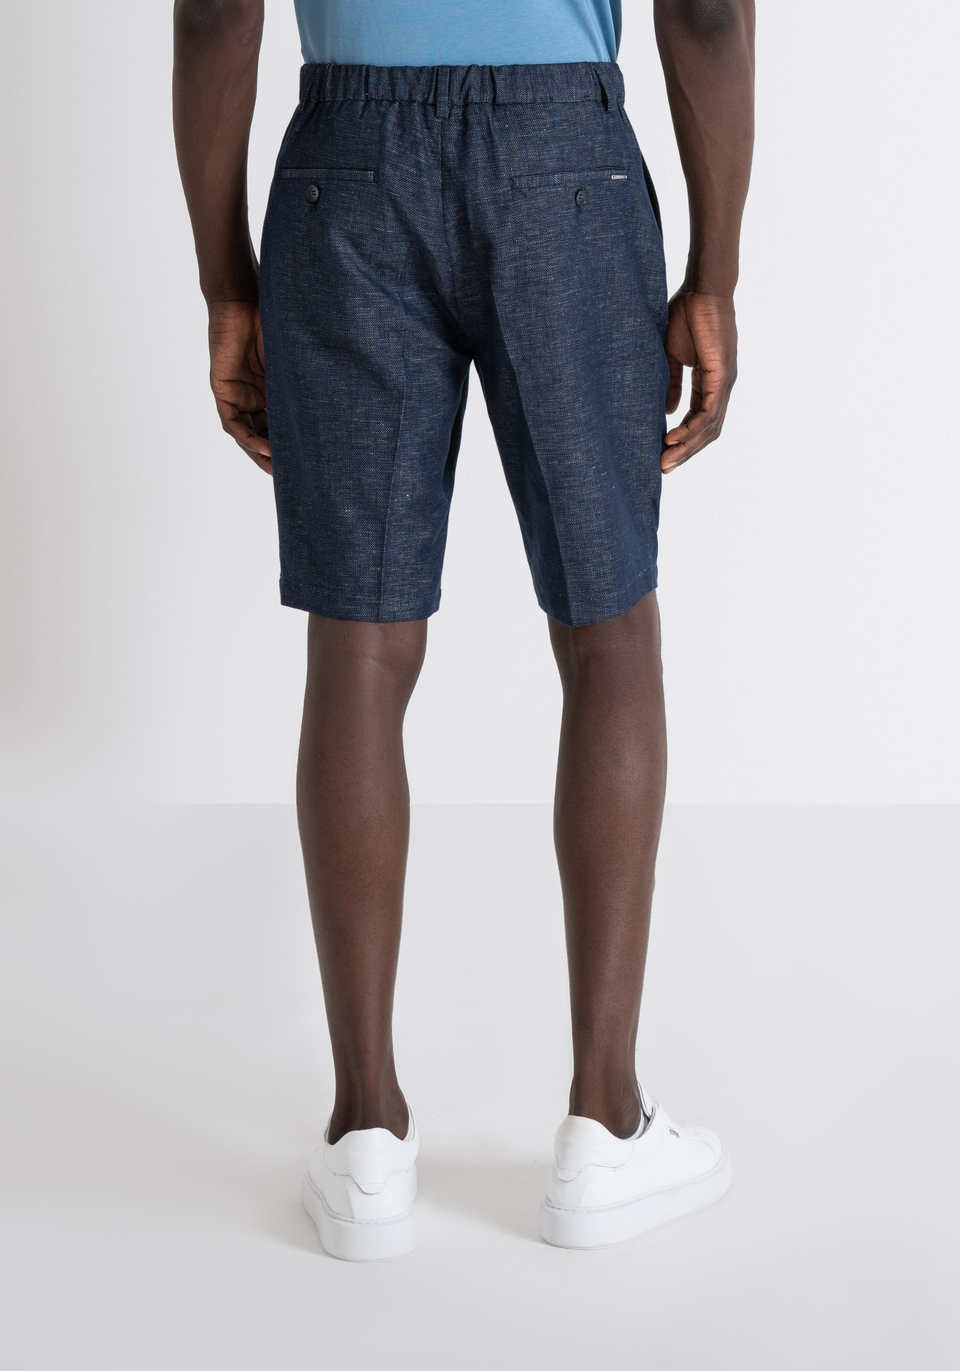 CARROT FIT "GUSTAF" SHORTS IN ARMORED COTTON-LINEN BLEND - Antony Morato Online Shop